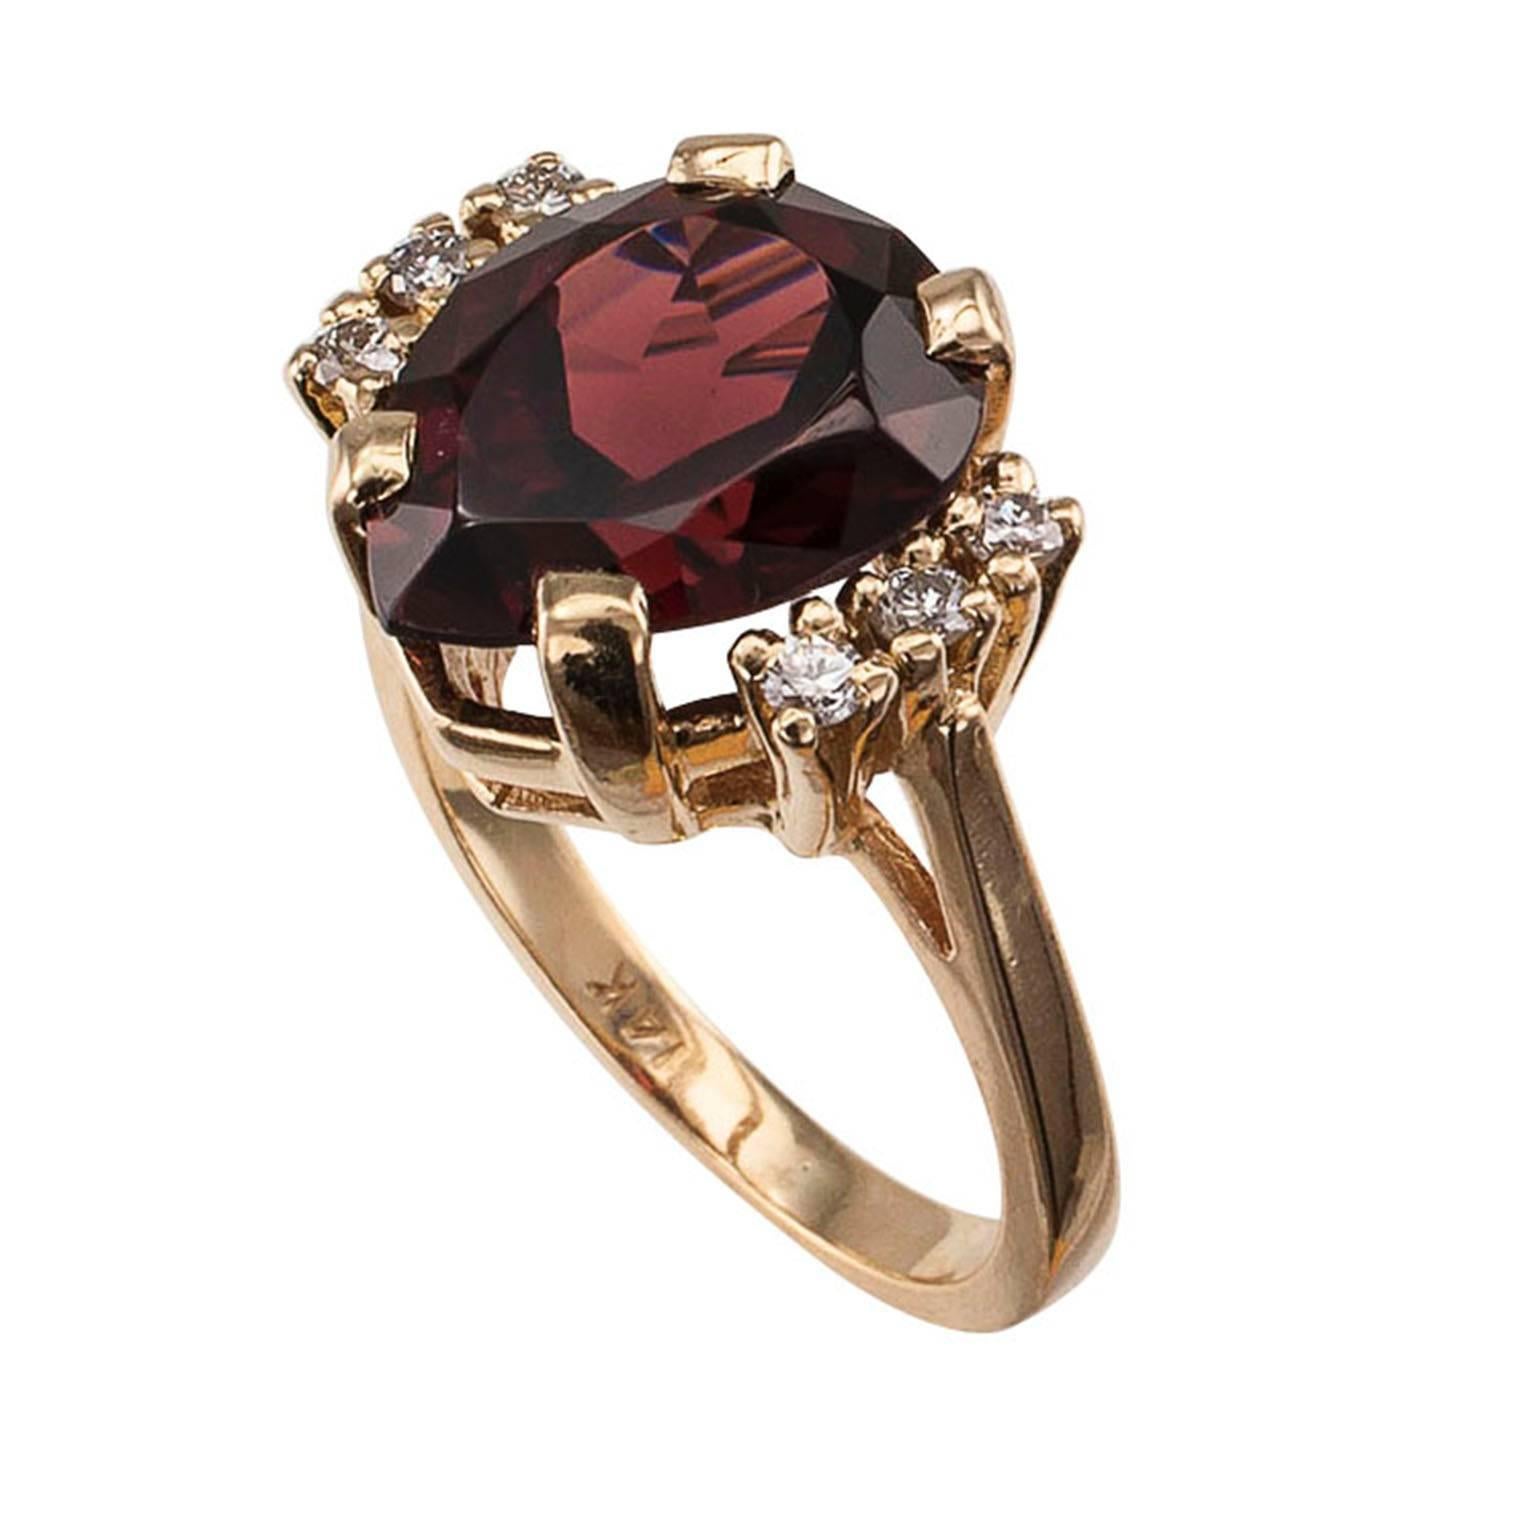 Garnet Diamond Gold Ring

Garnet and diamond gold ring circa 1980.  A teardrop-shaped garnet weighing approximately 6.50 carats has the starring role in this charming ring.  With its extremely pleasing color reminiscent  of a fine claret wine, it